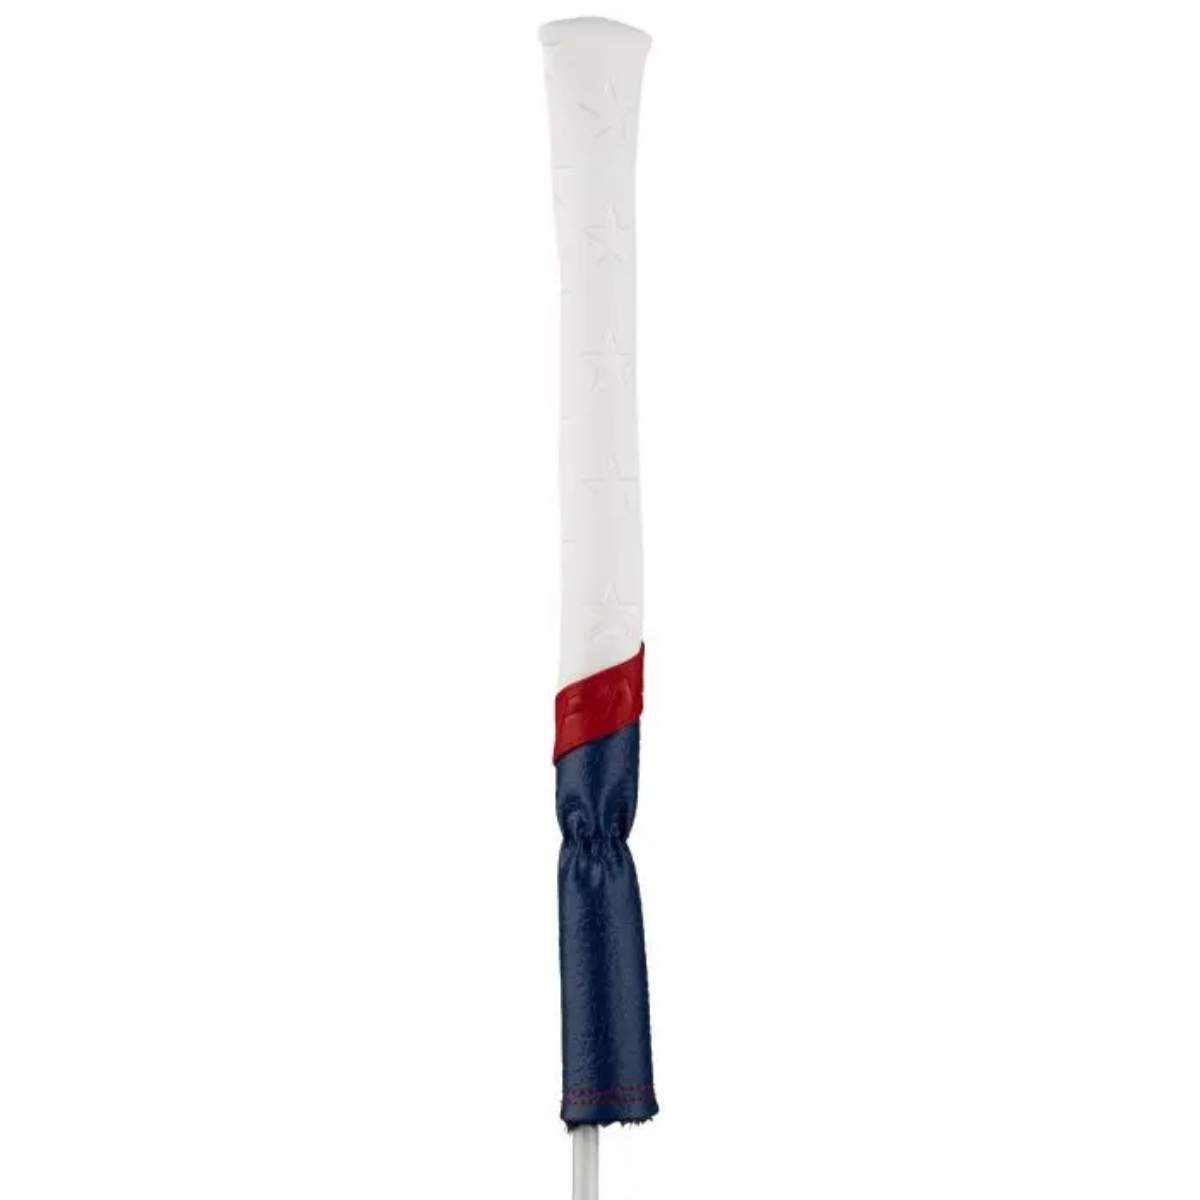 PING Stars & Stripes Alignment Stick Cover